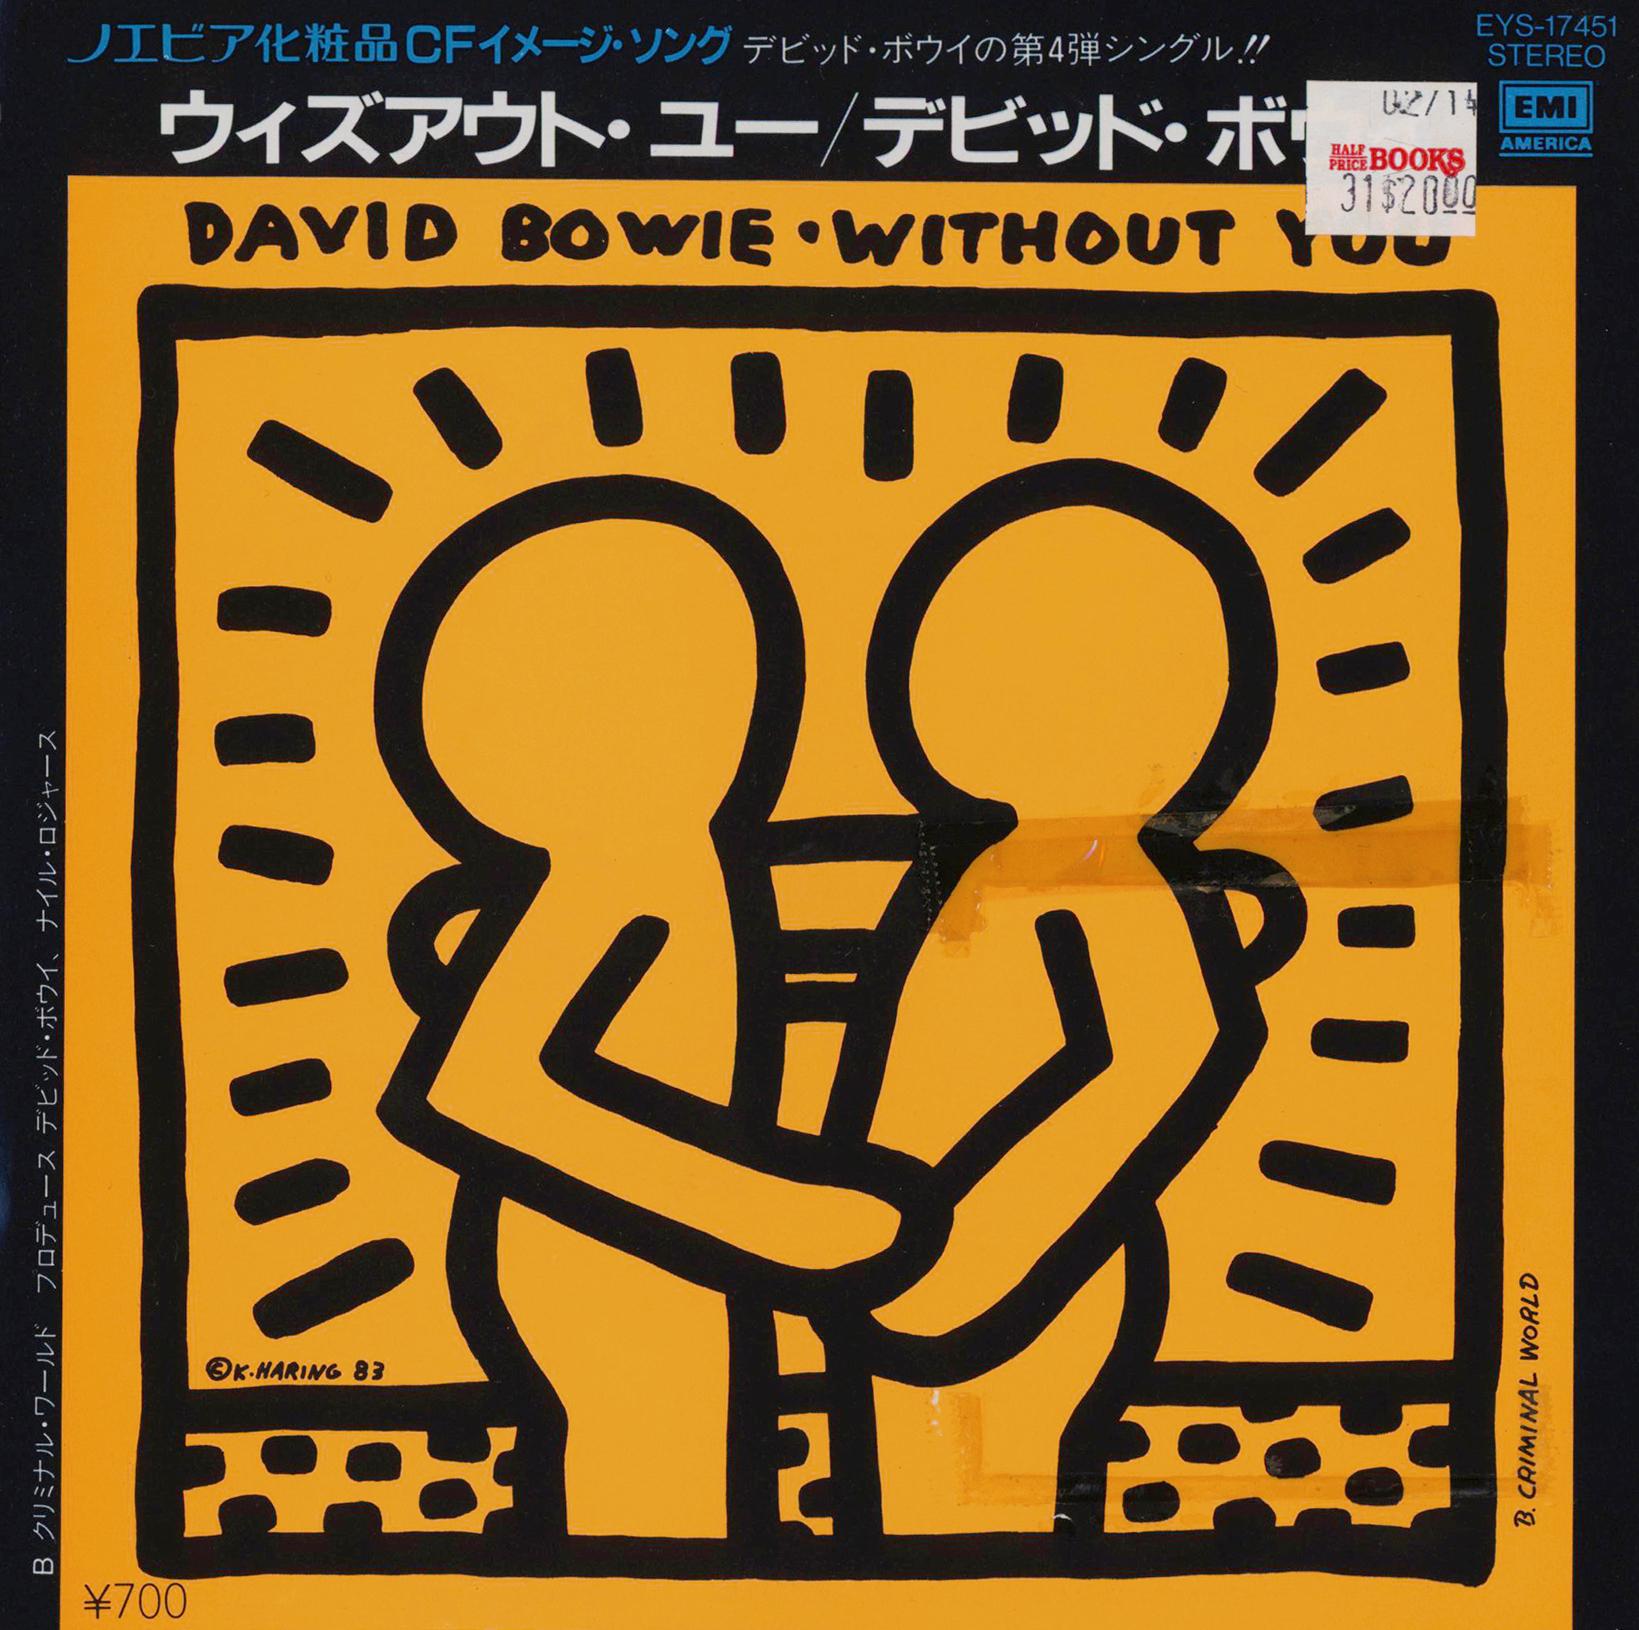 David BOWIE "Without You" A Rare Highly Sought After Vinyl Art Cover featuring Original Artwork by Keith Haring. Rare Japan 1st Pressing 1983:

Medium: Off-Set Lithograph. Dimensions: 7 x 7 inches
Plate signed on lower left & dated K. Haring